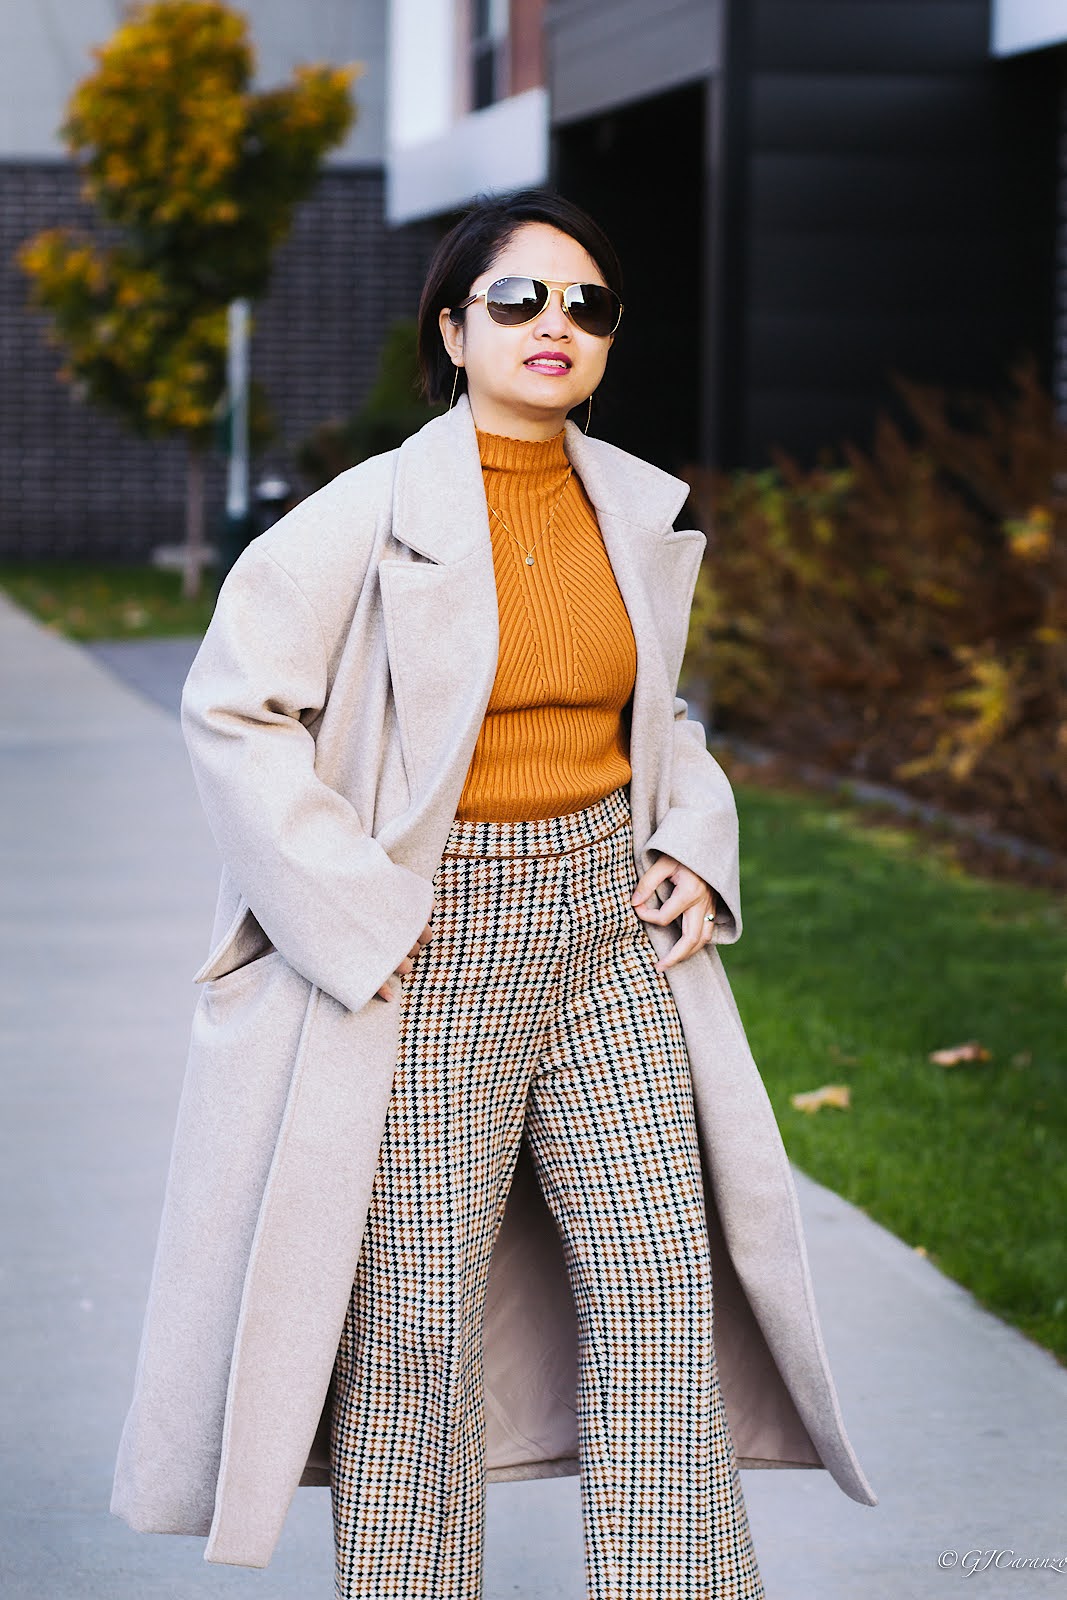 Zara Long Beige Coat + Houndstooth Print Knit Pants | Ankle Boots | RayBan Polarized Sunglasses | Travel Outfit | Fall Fashion | Petite Outfit Ideas